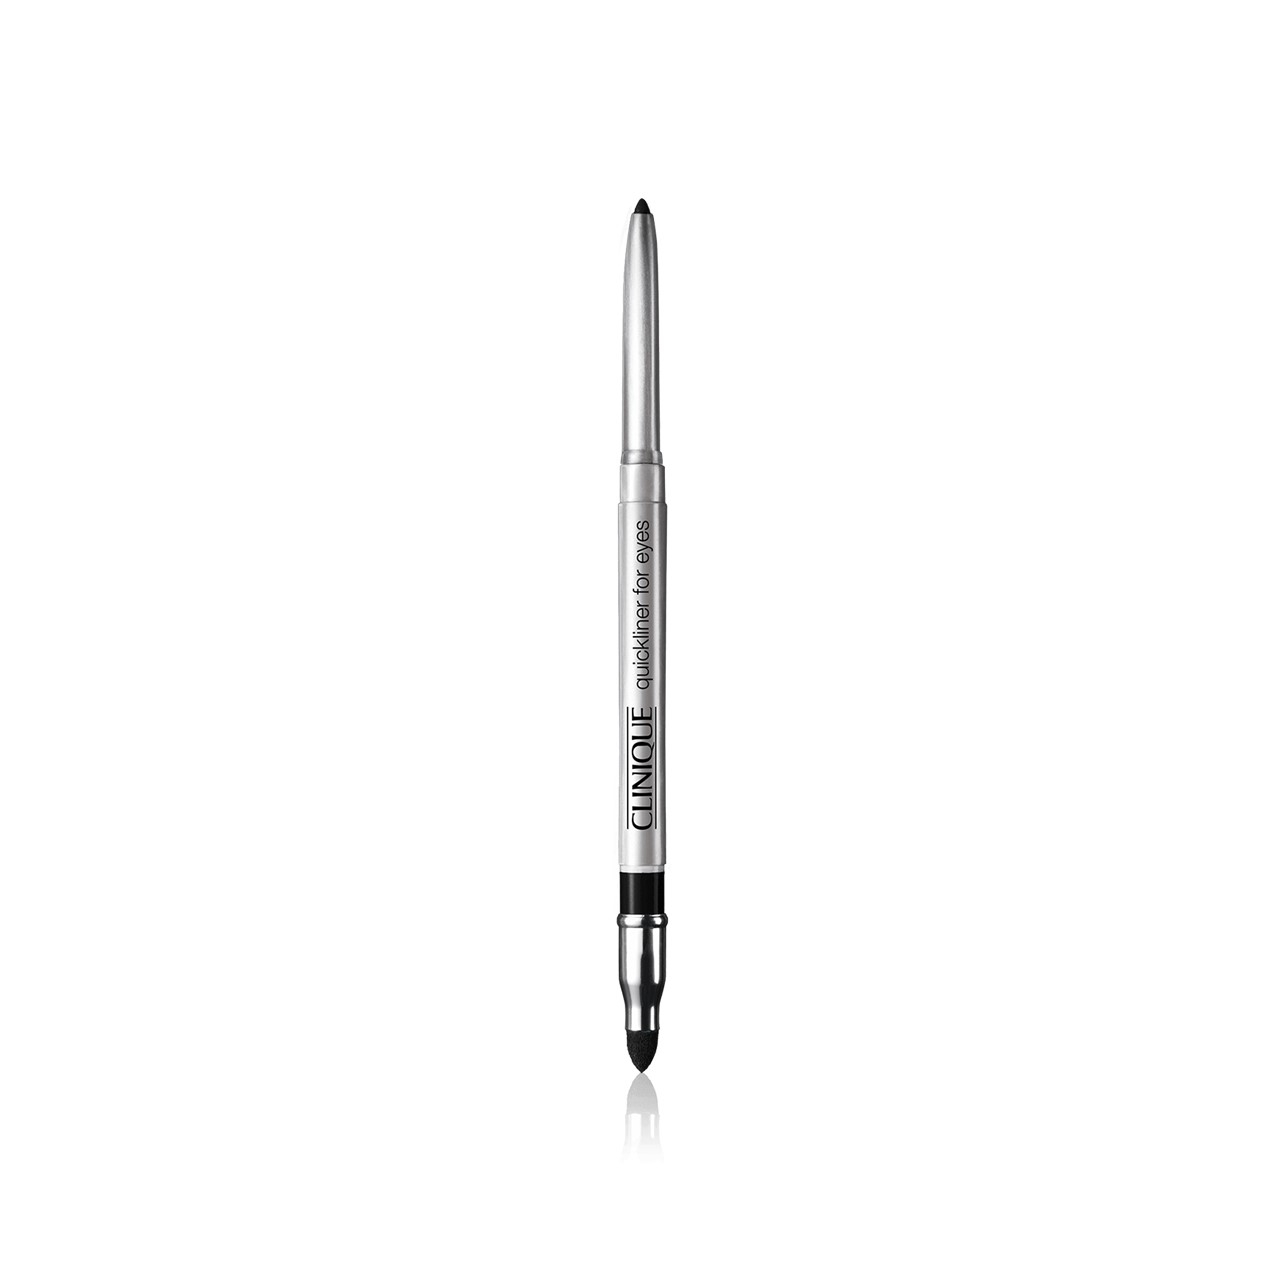 Clinique Quickliner For Eyes Really Black 0.3g (0.01oz)